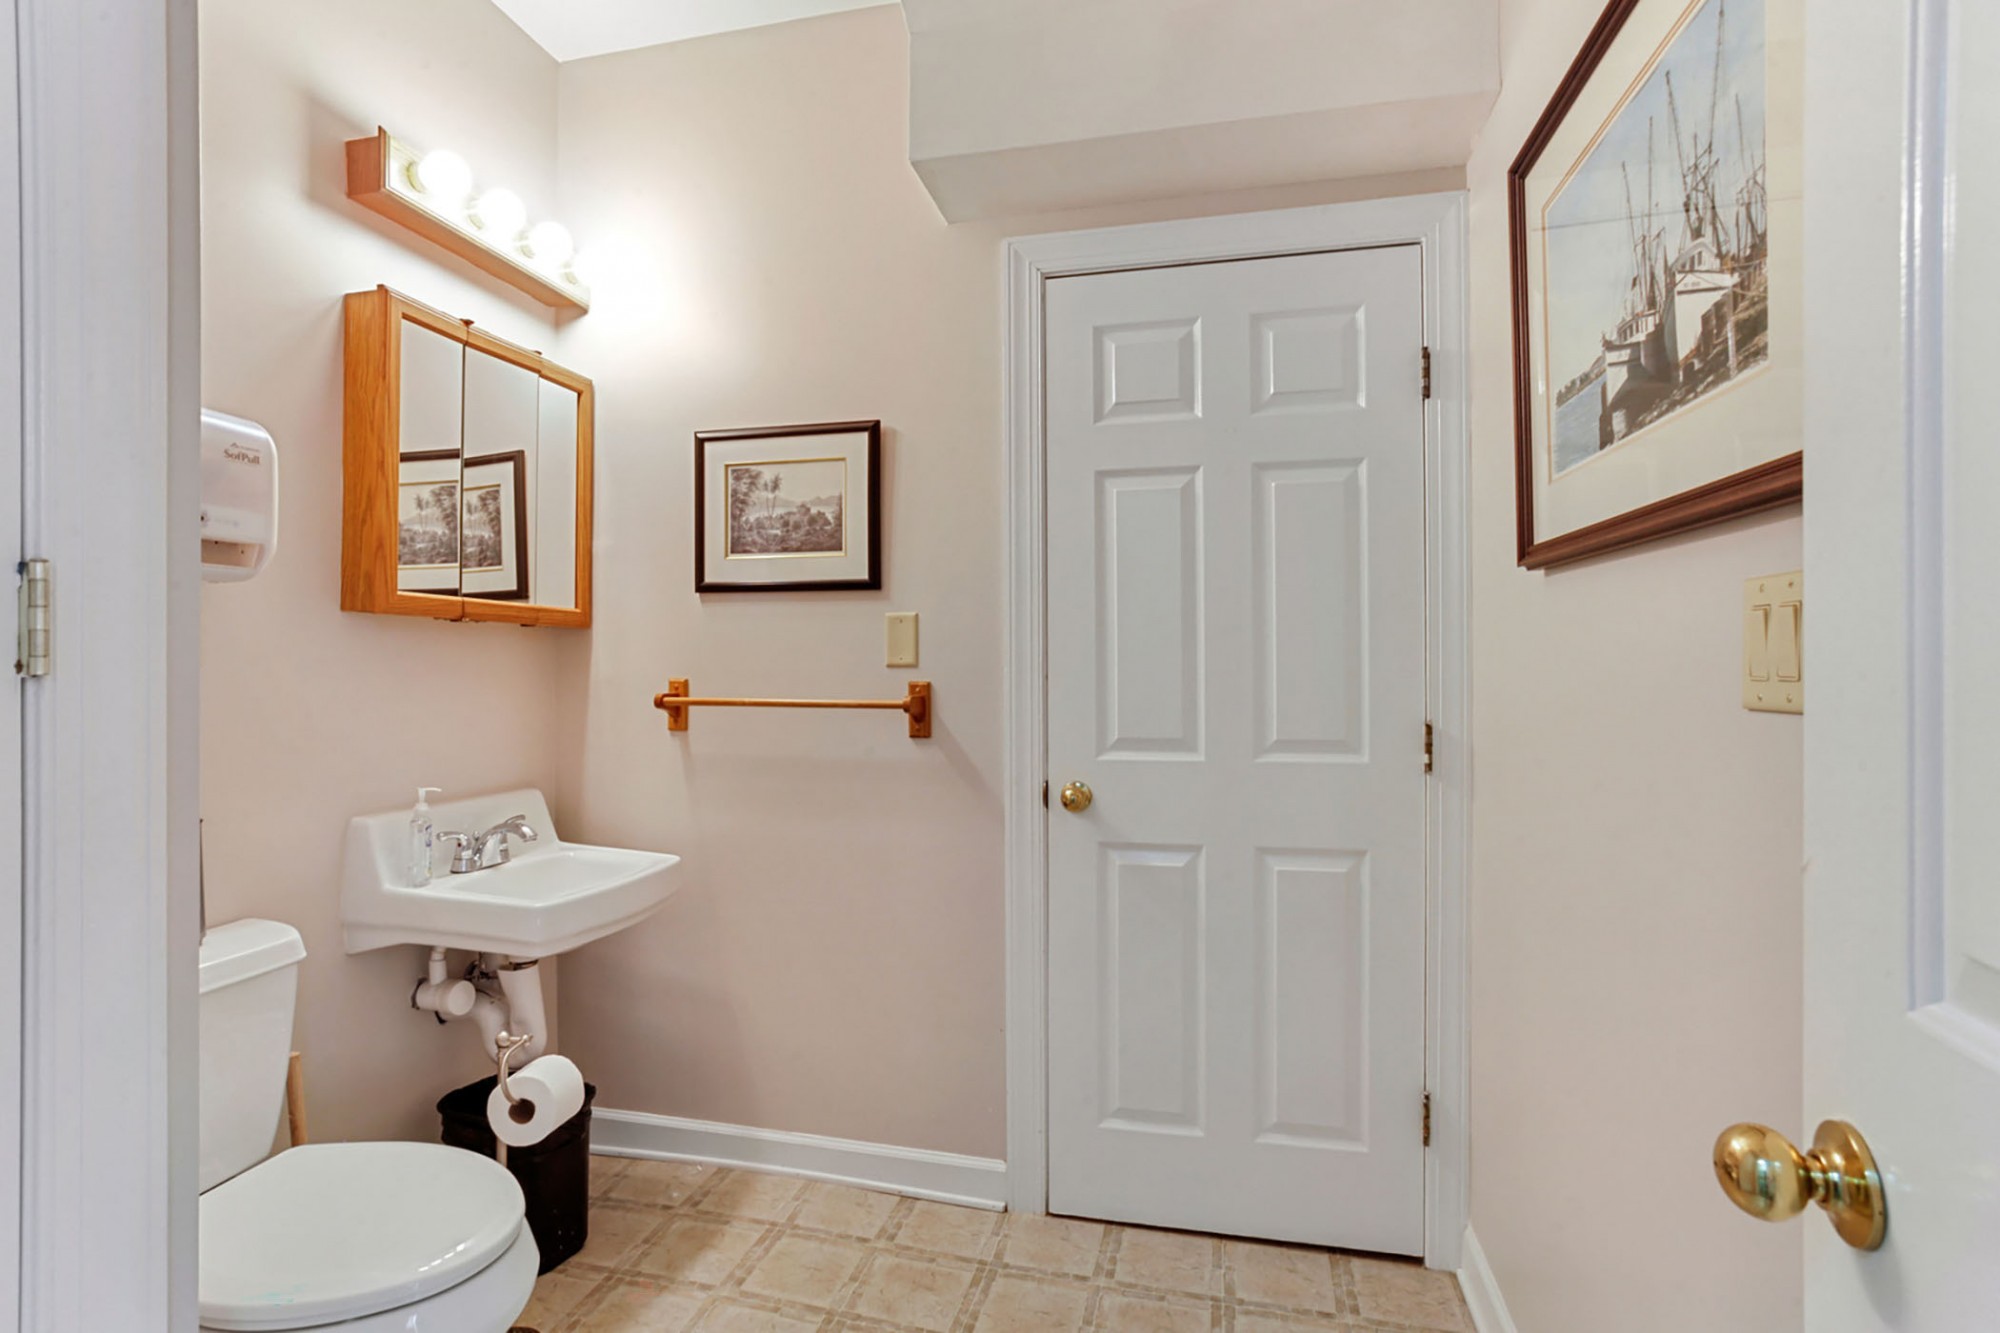 There are a total of 6 baths -- one full bath and five powder rooms!